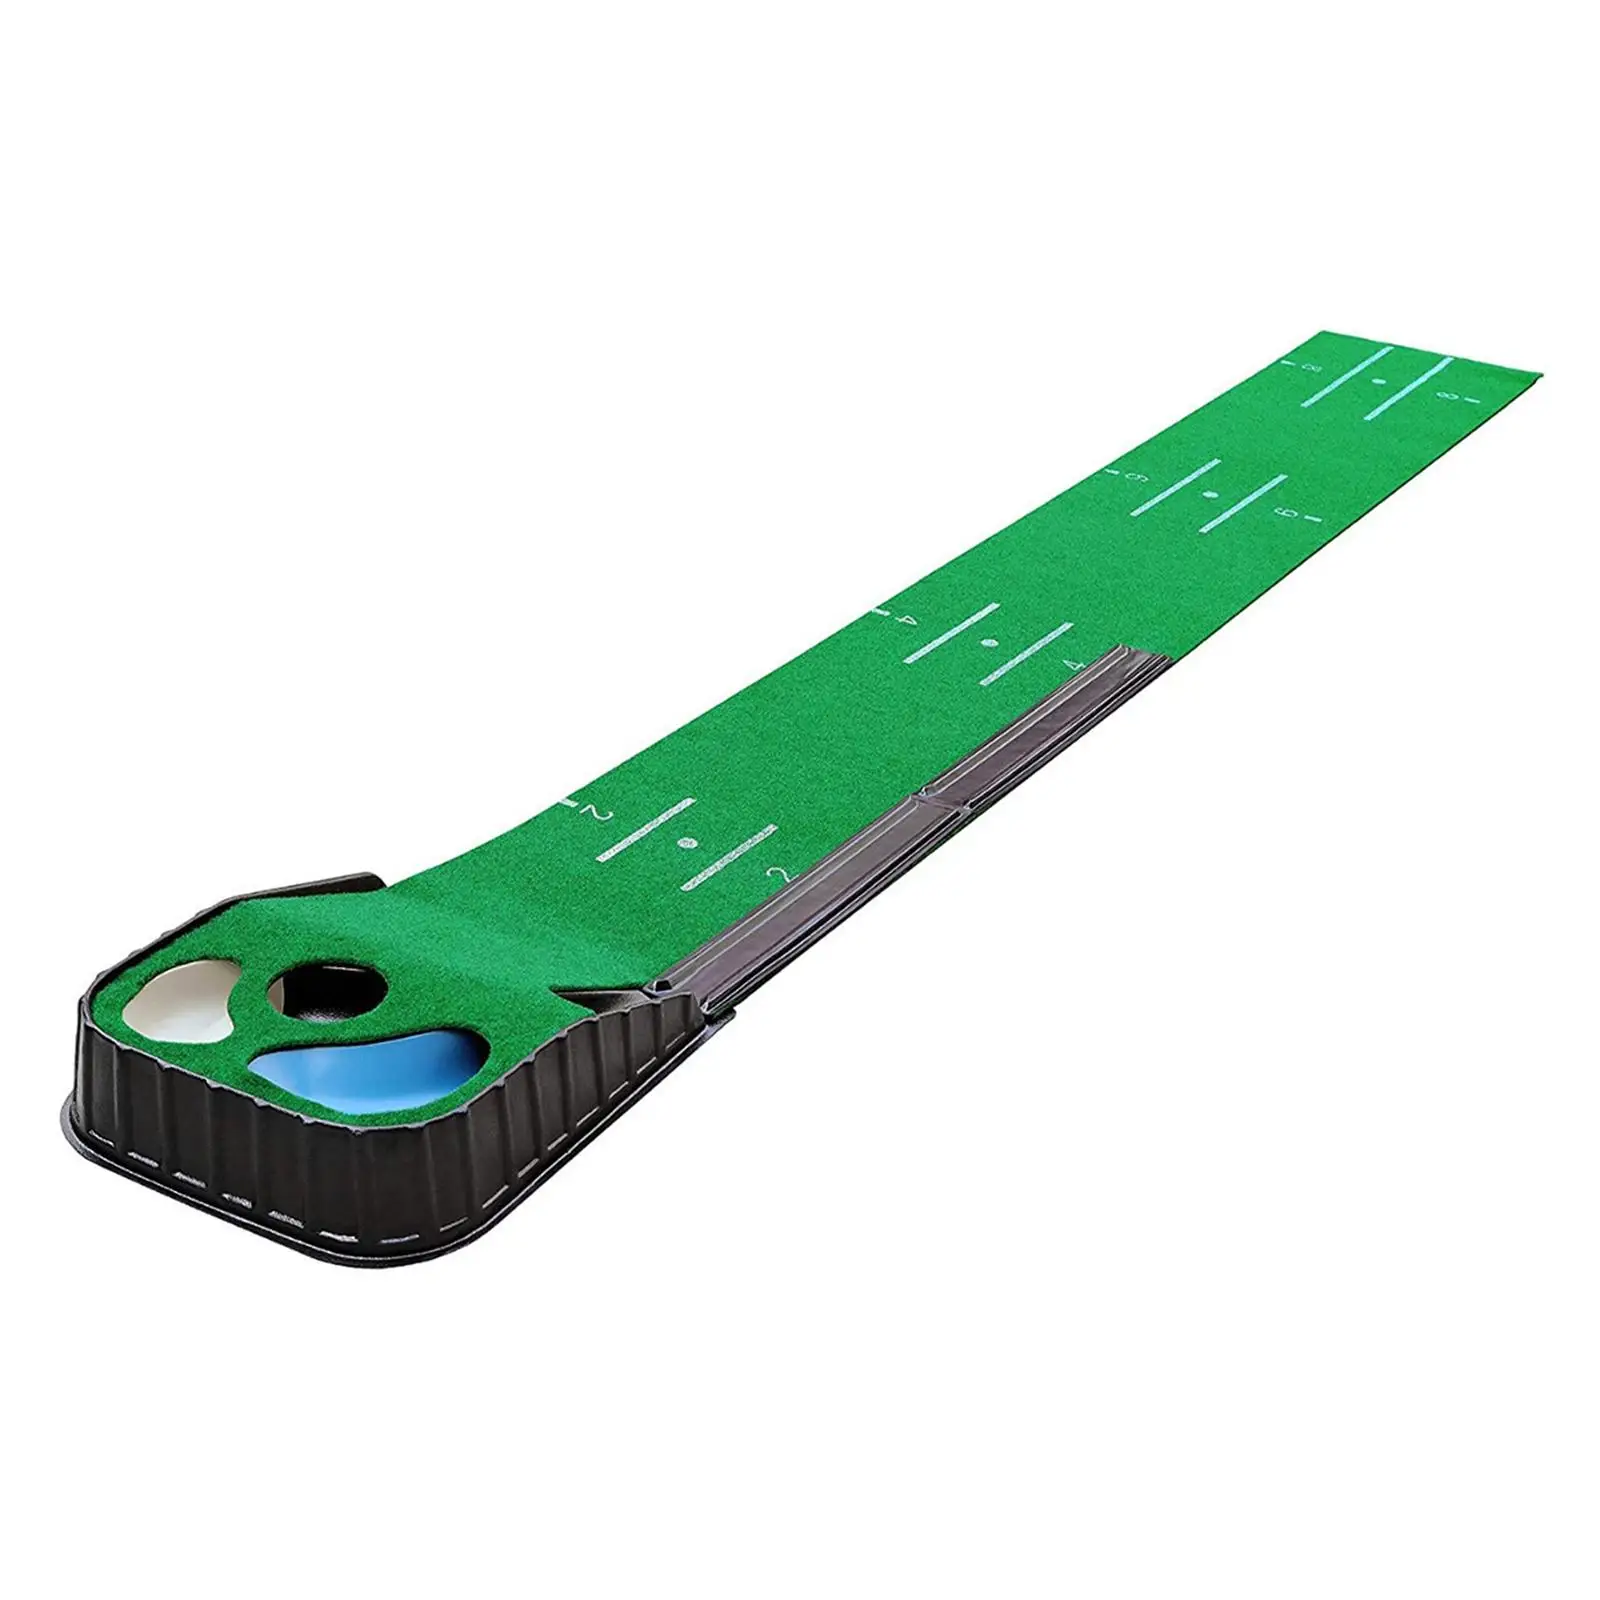 

Golf Putting Mat with Automatic Ball Return Simulator Foldable Golf Putting Training Aid for Office Home Gifts for Golfers